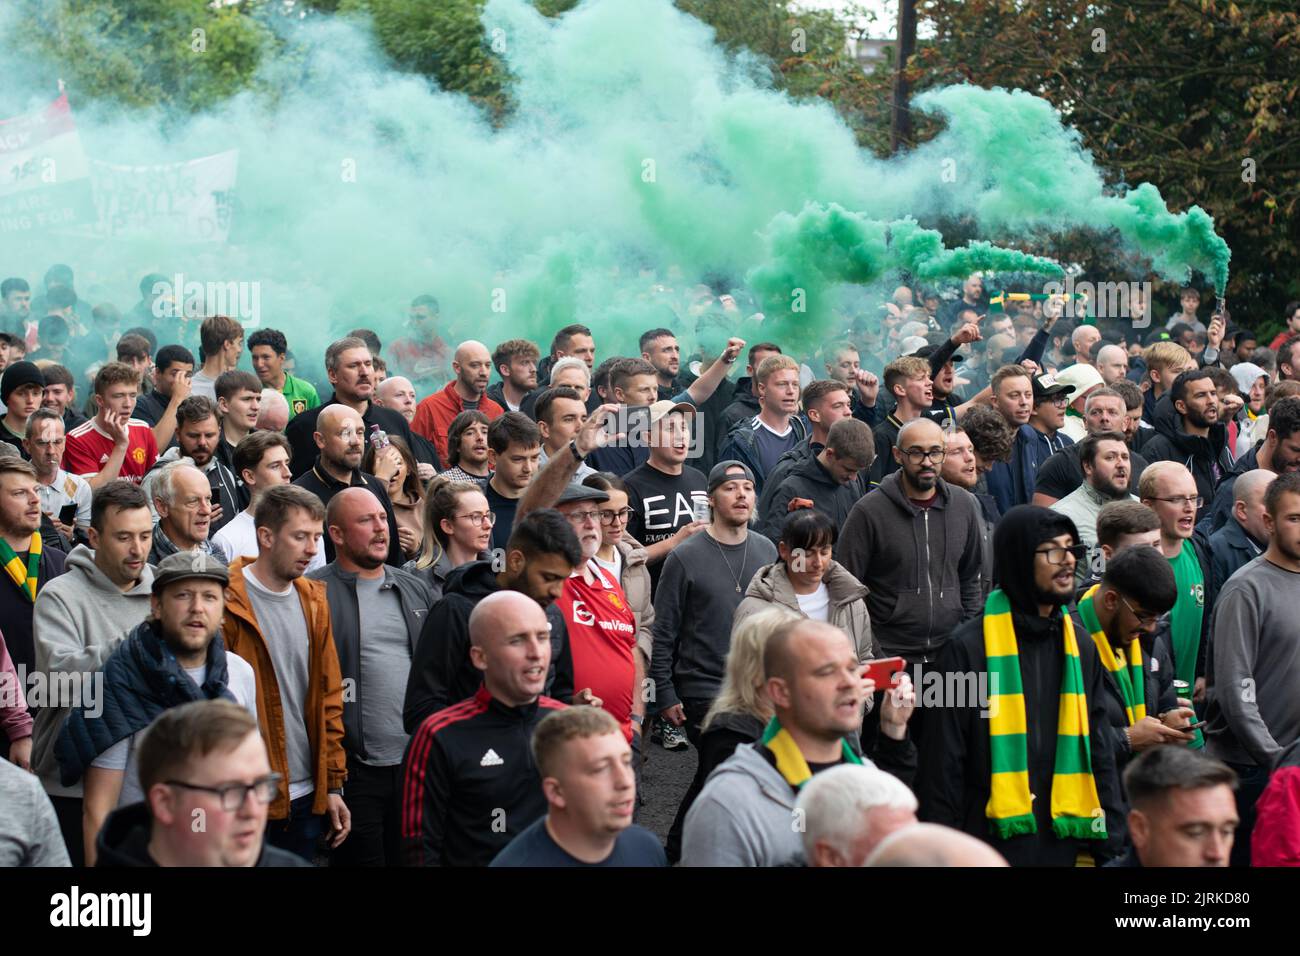 Protest march at Manchester United against Glazer owners. Large crowd. `Green smoke. Football match against Liverpool United. Stock Photo